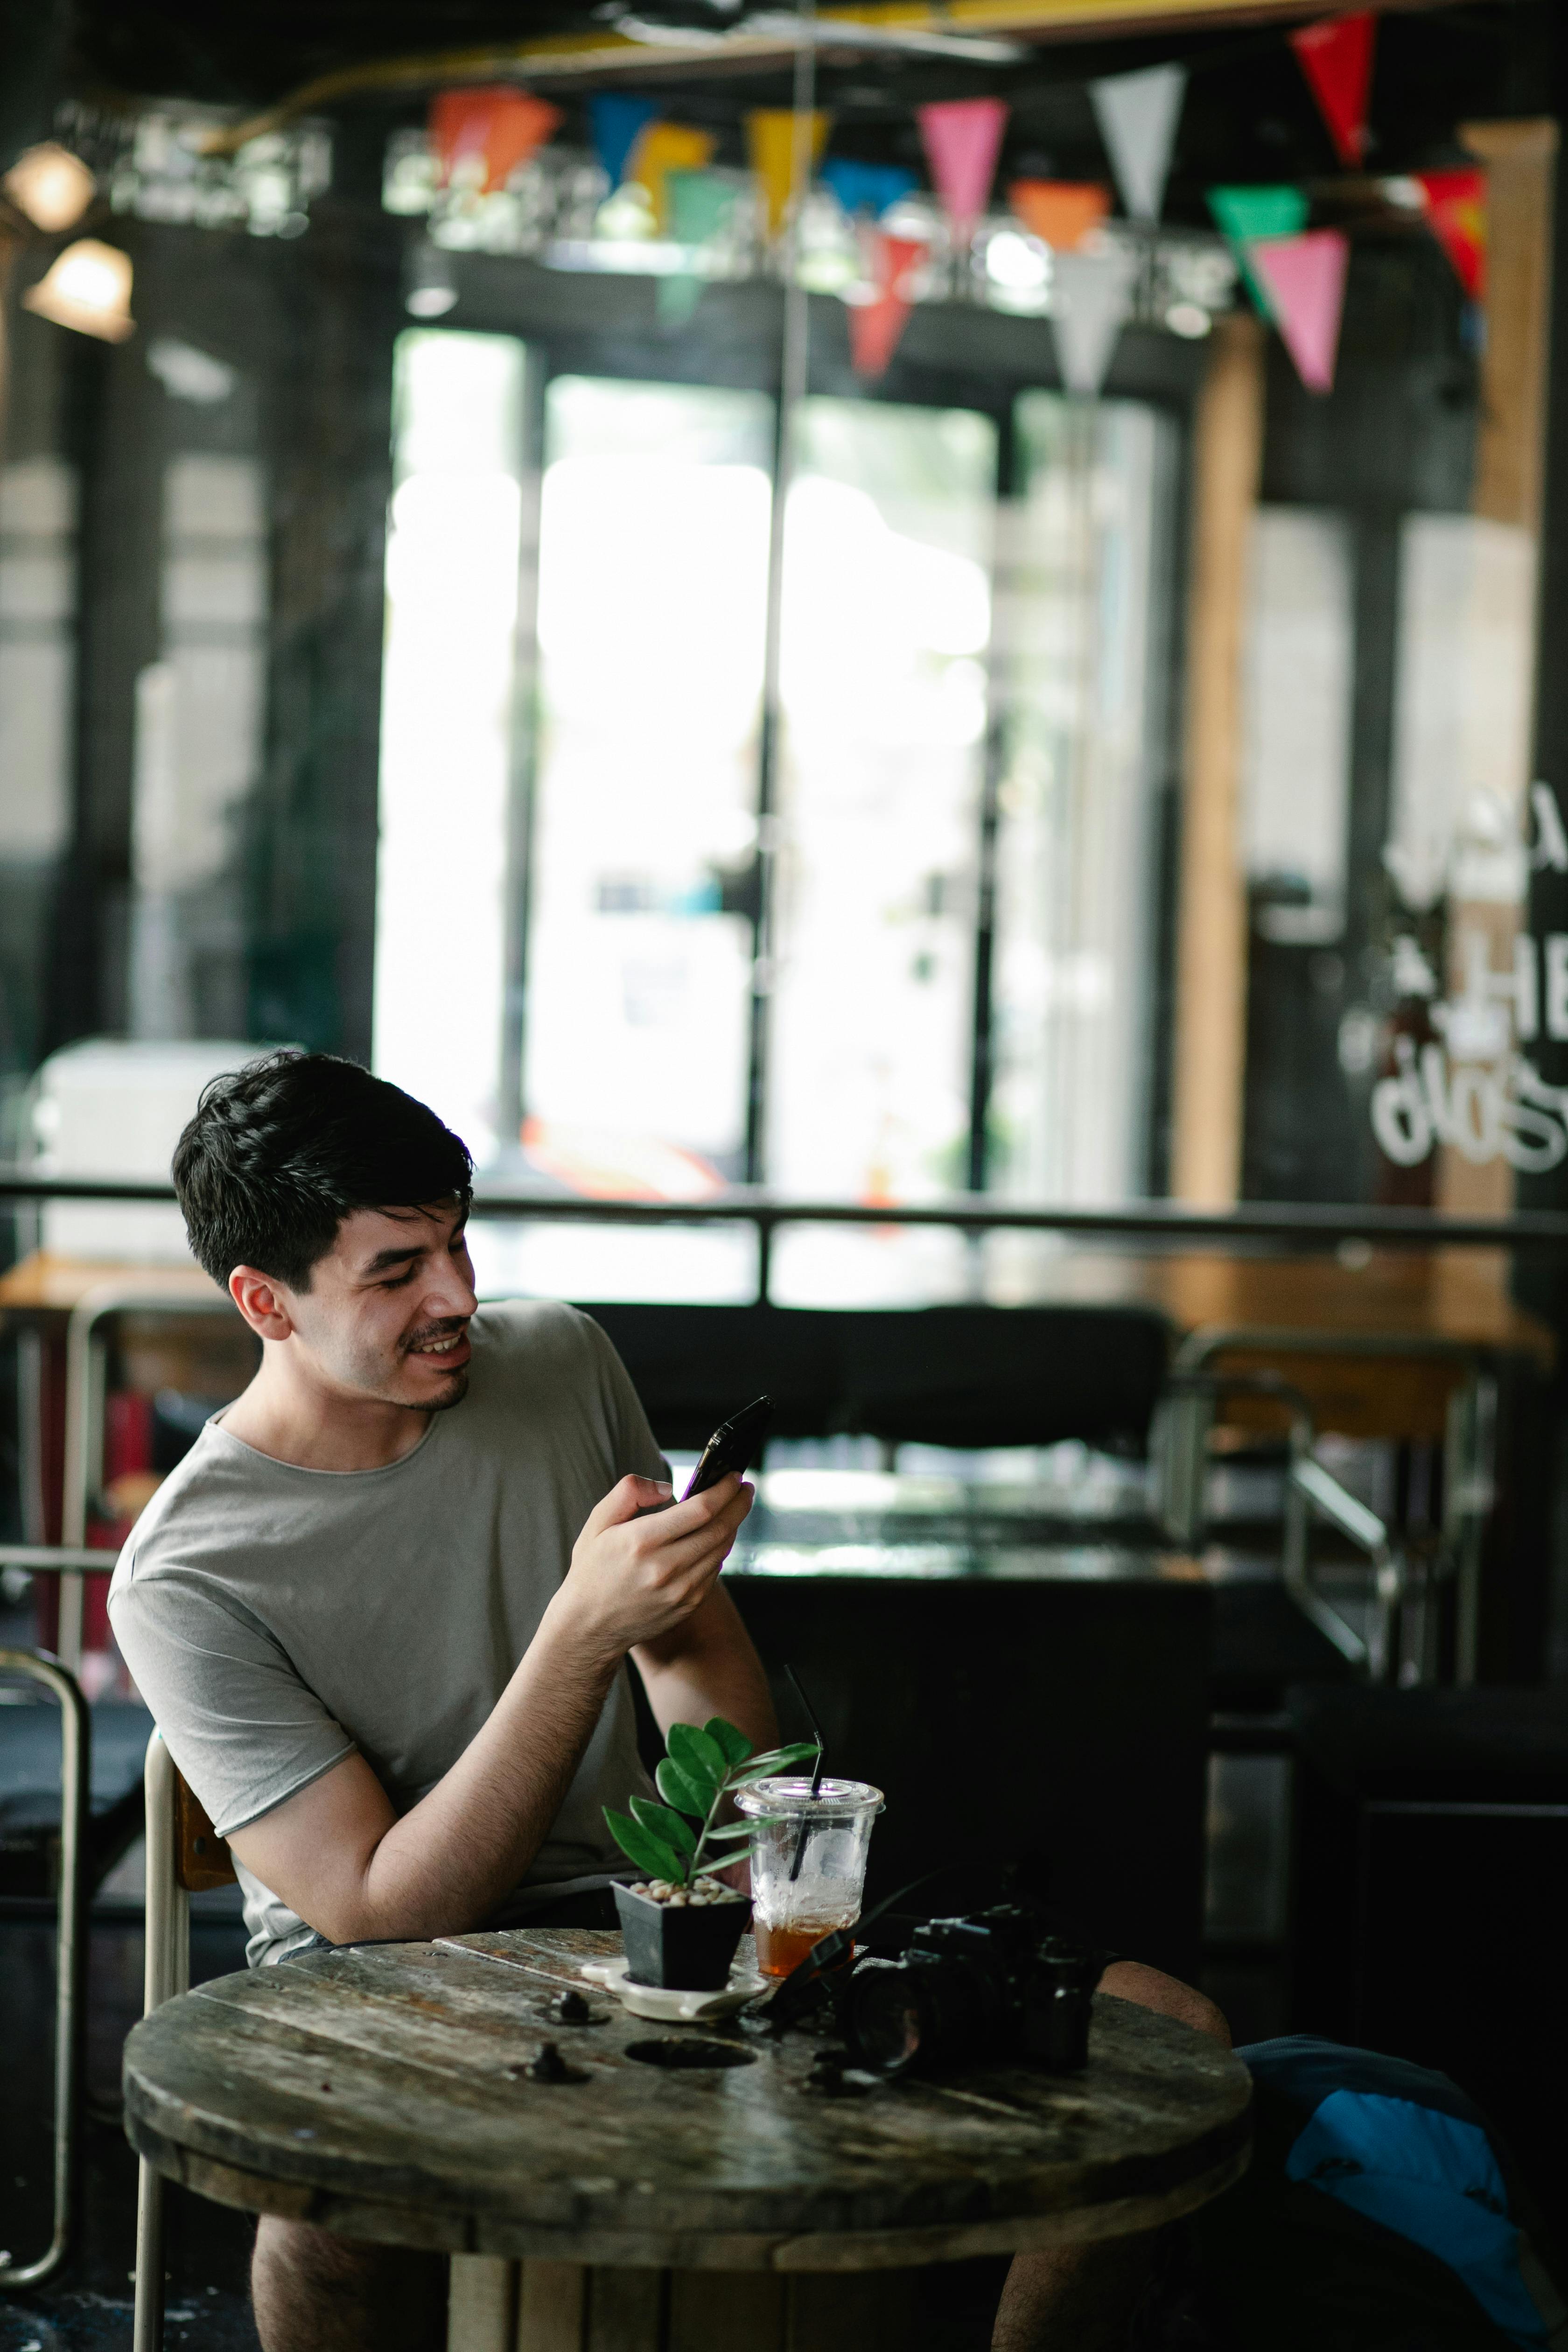 smiling young man browsing smartphone in cafe